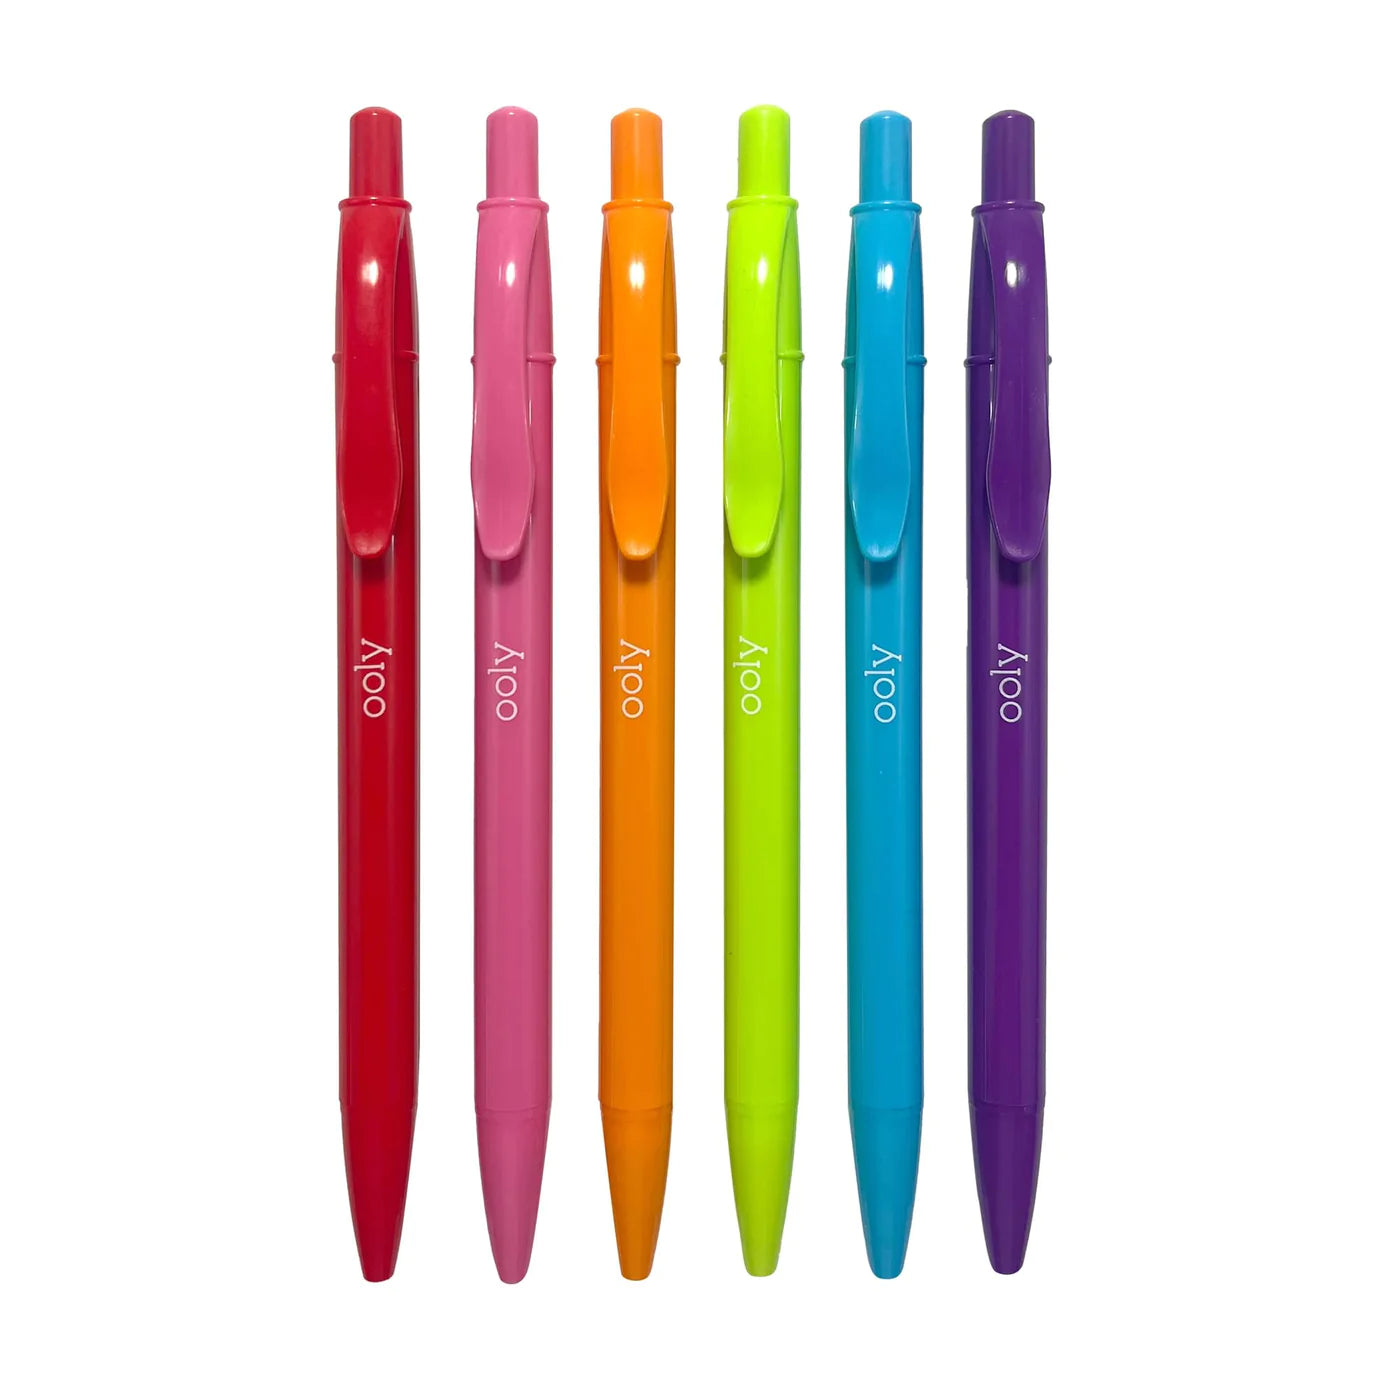 Ooly Bright Writers Colored Ink Retractable Ballpoint Pens - Set of 6-OOLY-Little Giant Kidz